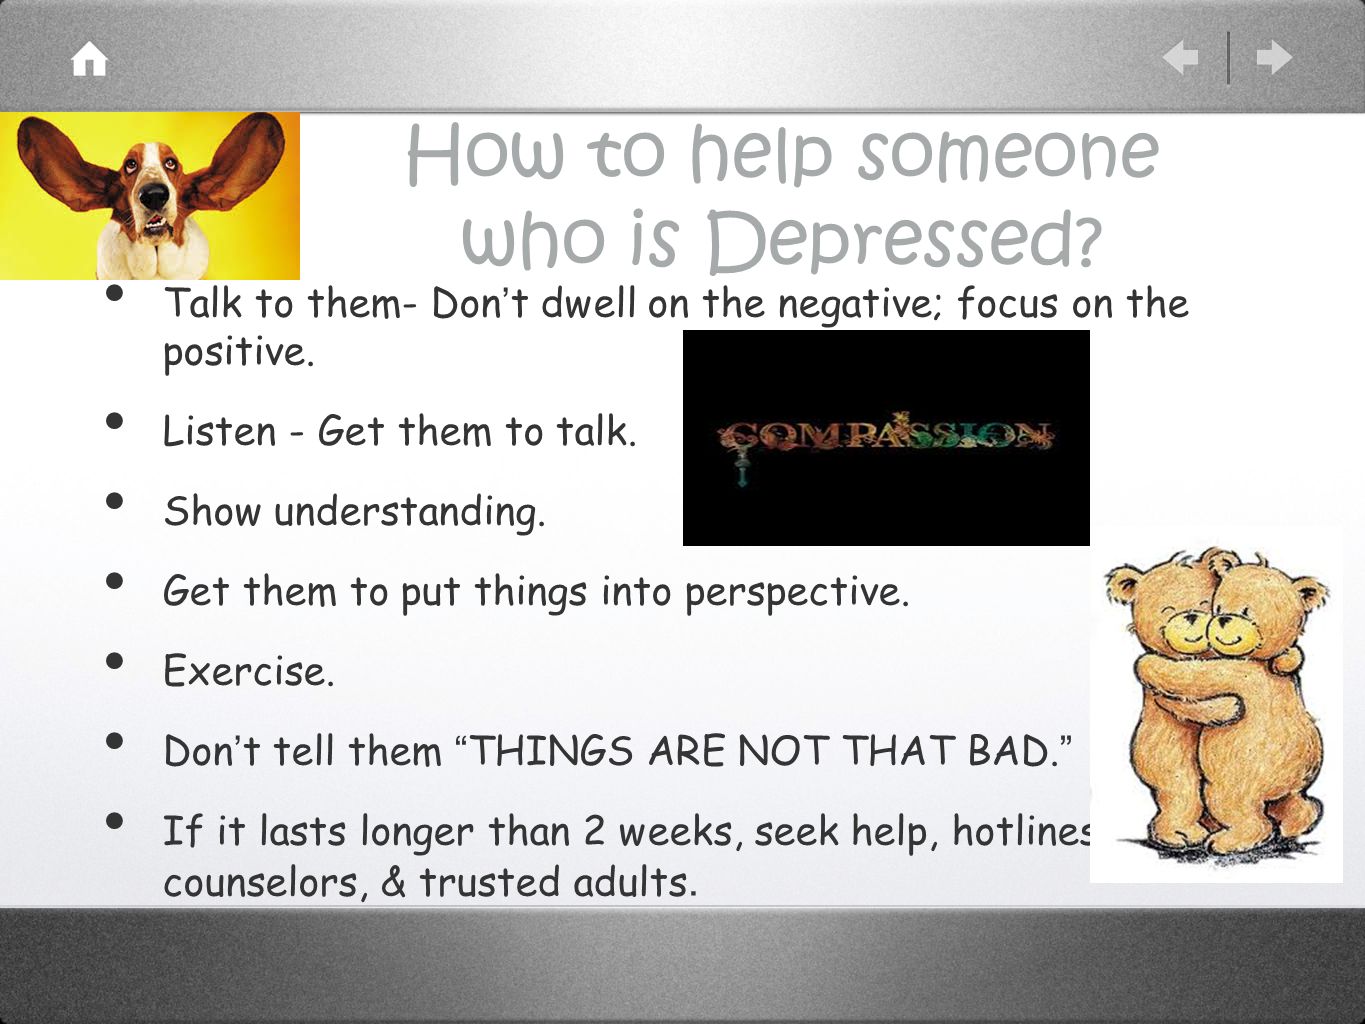 How to help someone who is Depressed.